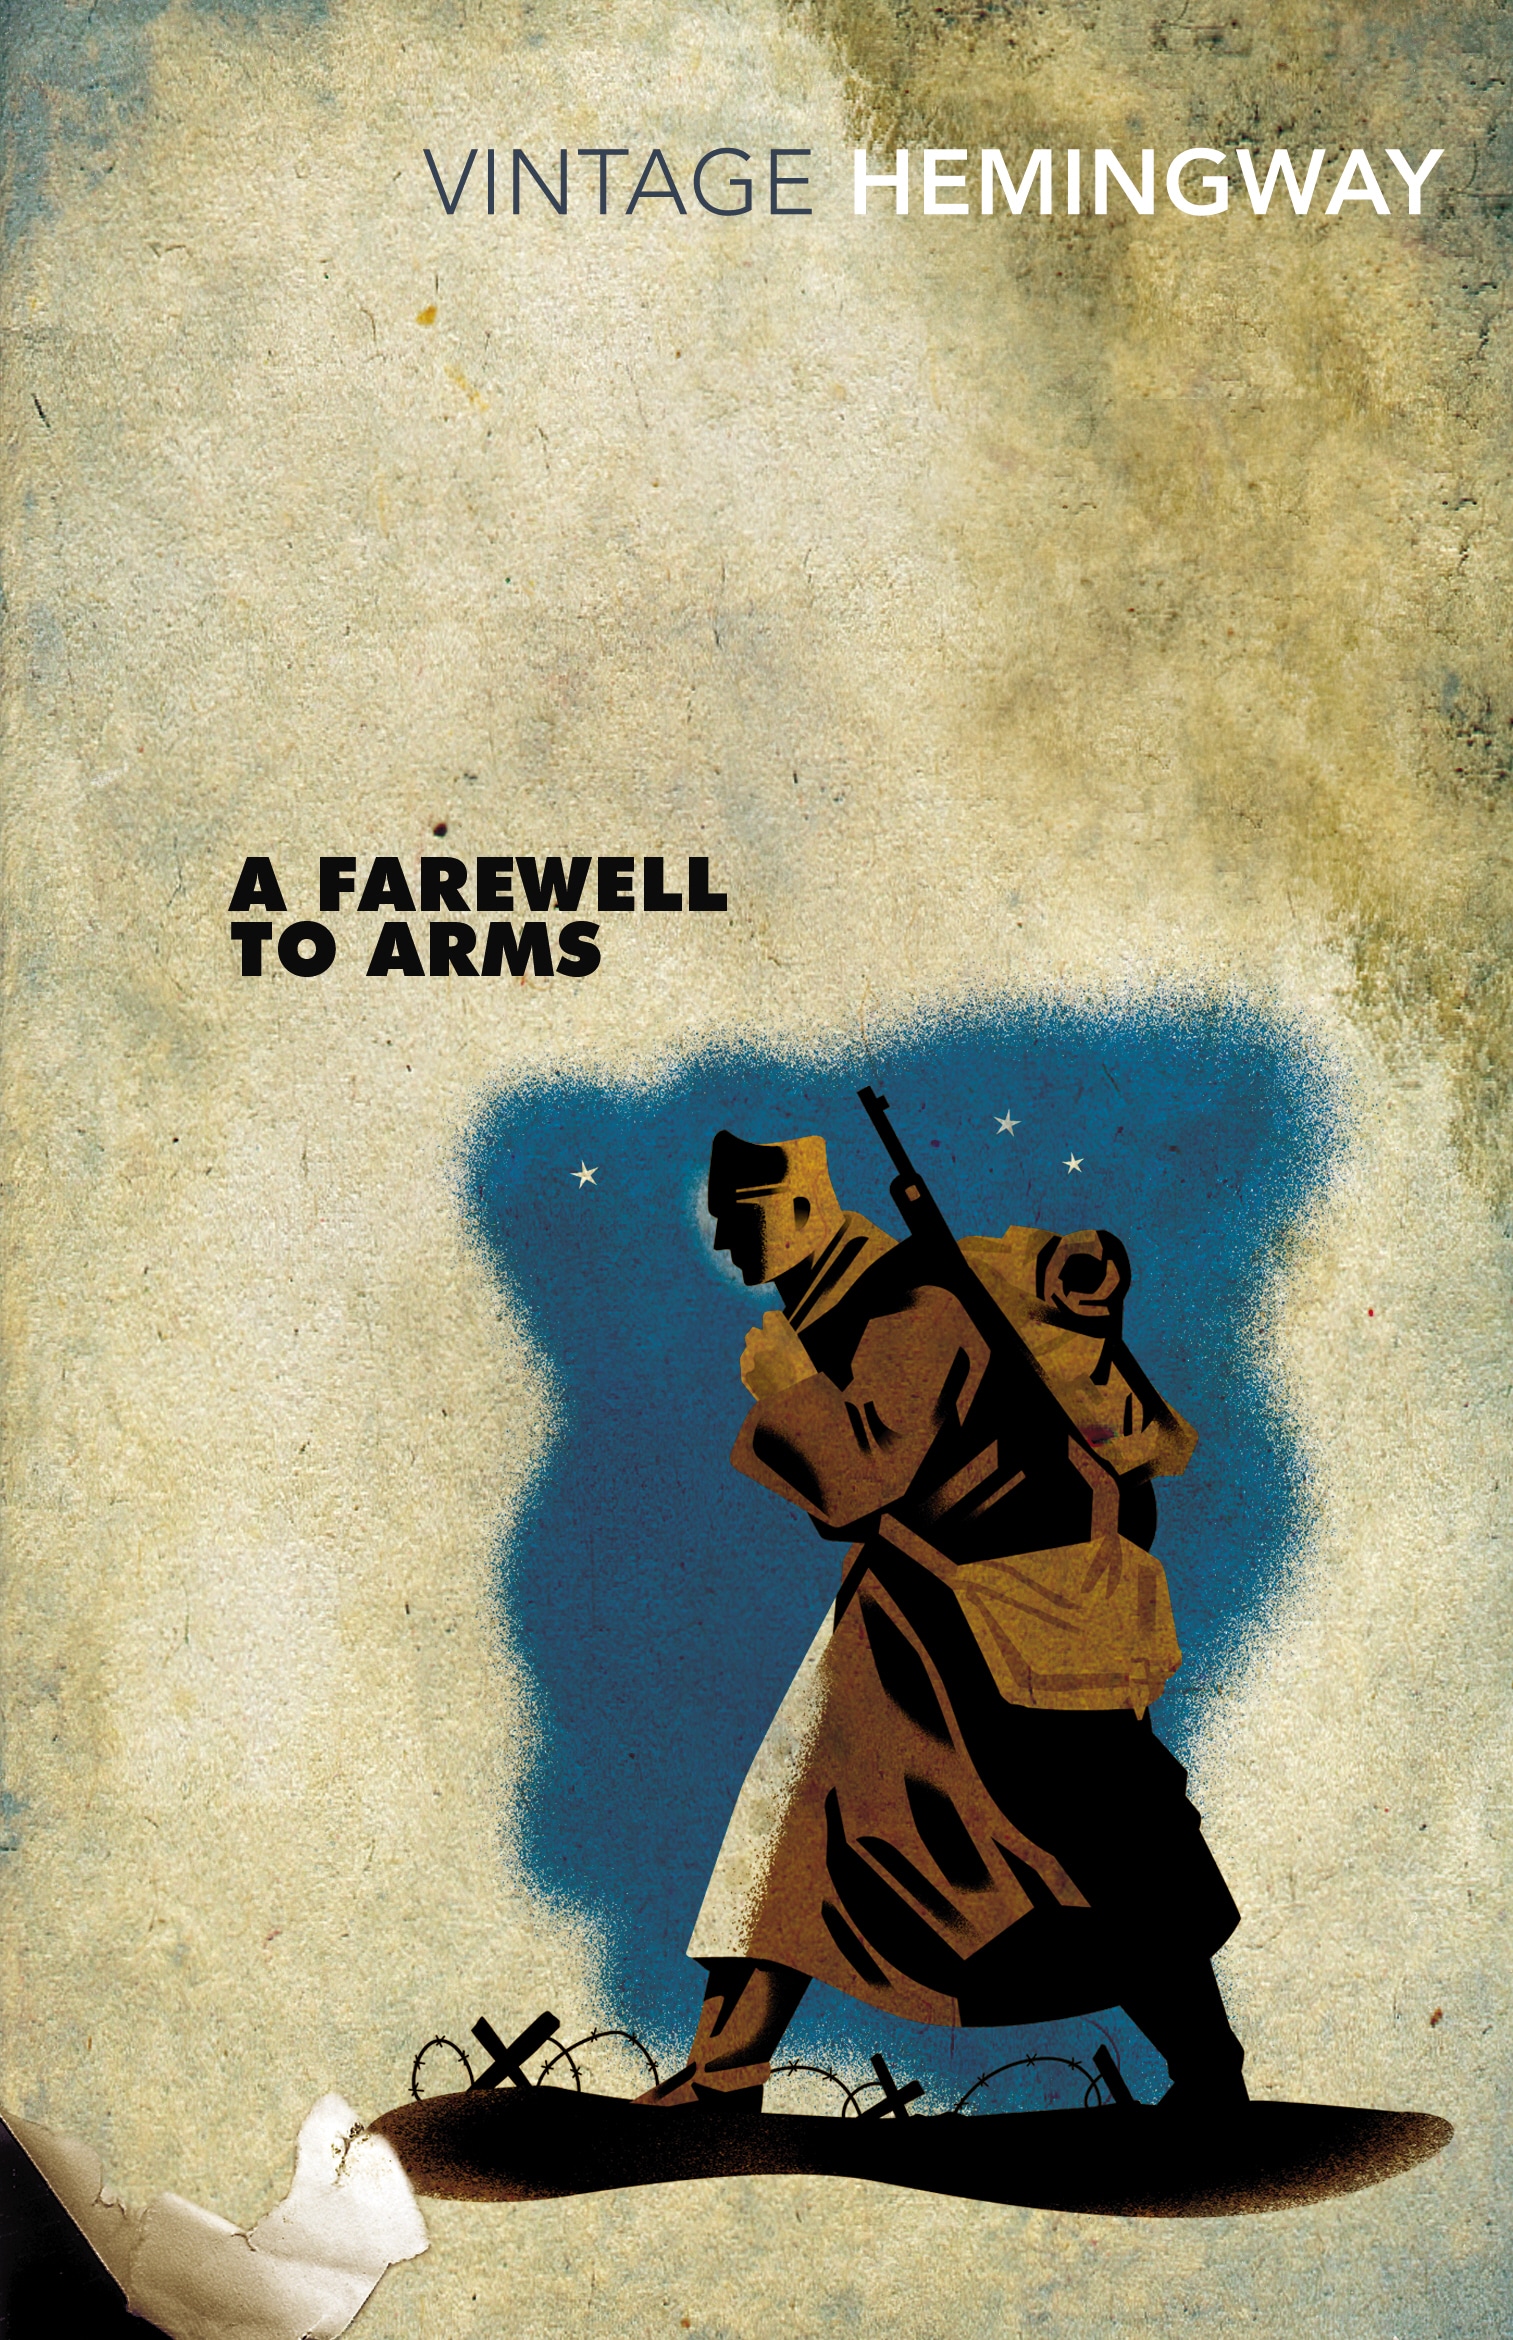 Book “A Farewell to Arms” by Ernest Hemingway — February 4, 1999